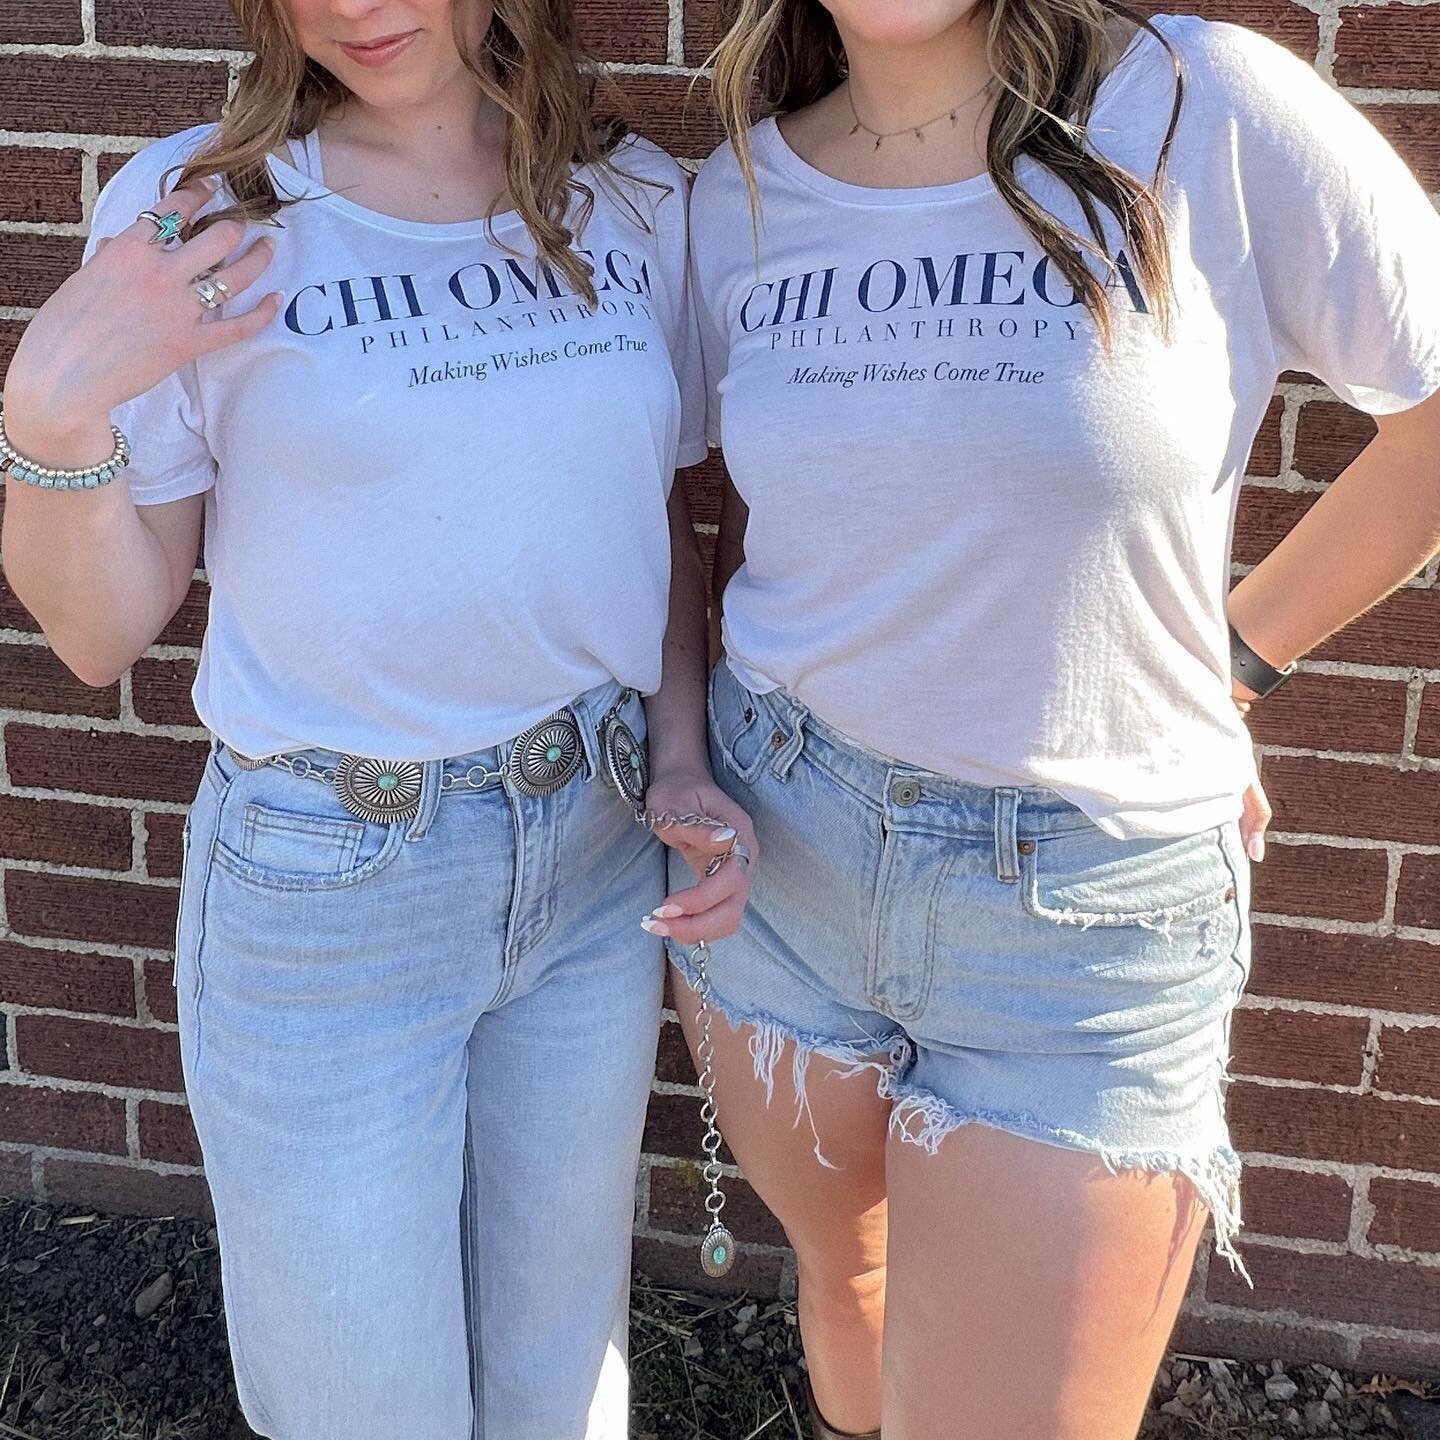 It&rsquo;s Philanthropy day !!!

Join us in supporting Make-A-Wish at #CHIORODEO today from 5-8! Enjoy live music, mac n cheese, barbecue, &amp; MORE!! See you there 🤠

#chiomega #etabeta #makeawish #philanthropy #chiorodeo